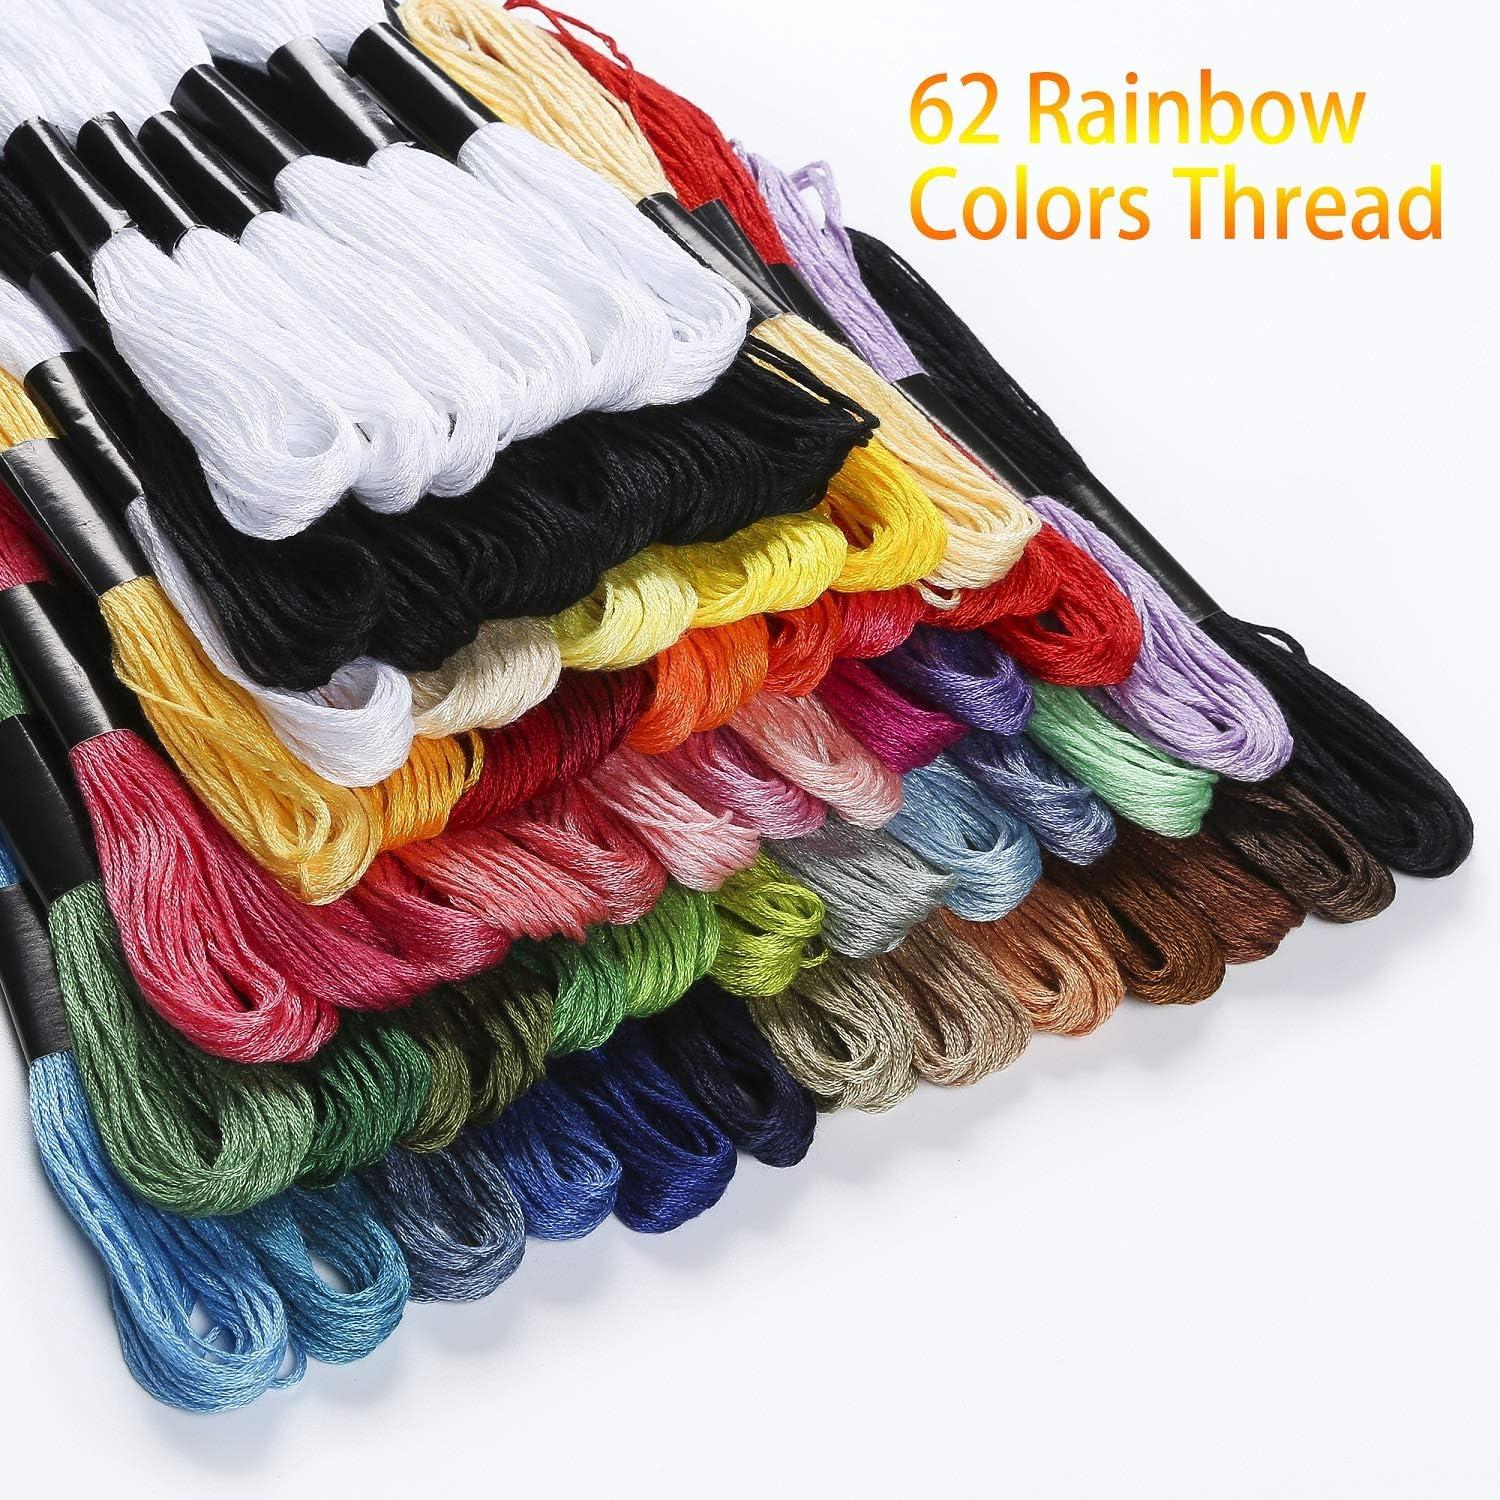 Peirich Embroidery Floss 62 Skeins Friendship Bracelets Floss with Black  White Cross Stitch Floss Embroidery Thread Embroidery Needles 12 Pieces  Floss Bobbins - Great Gift for Mother's Day